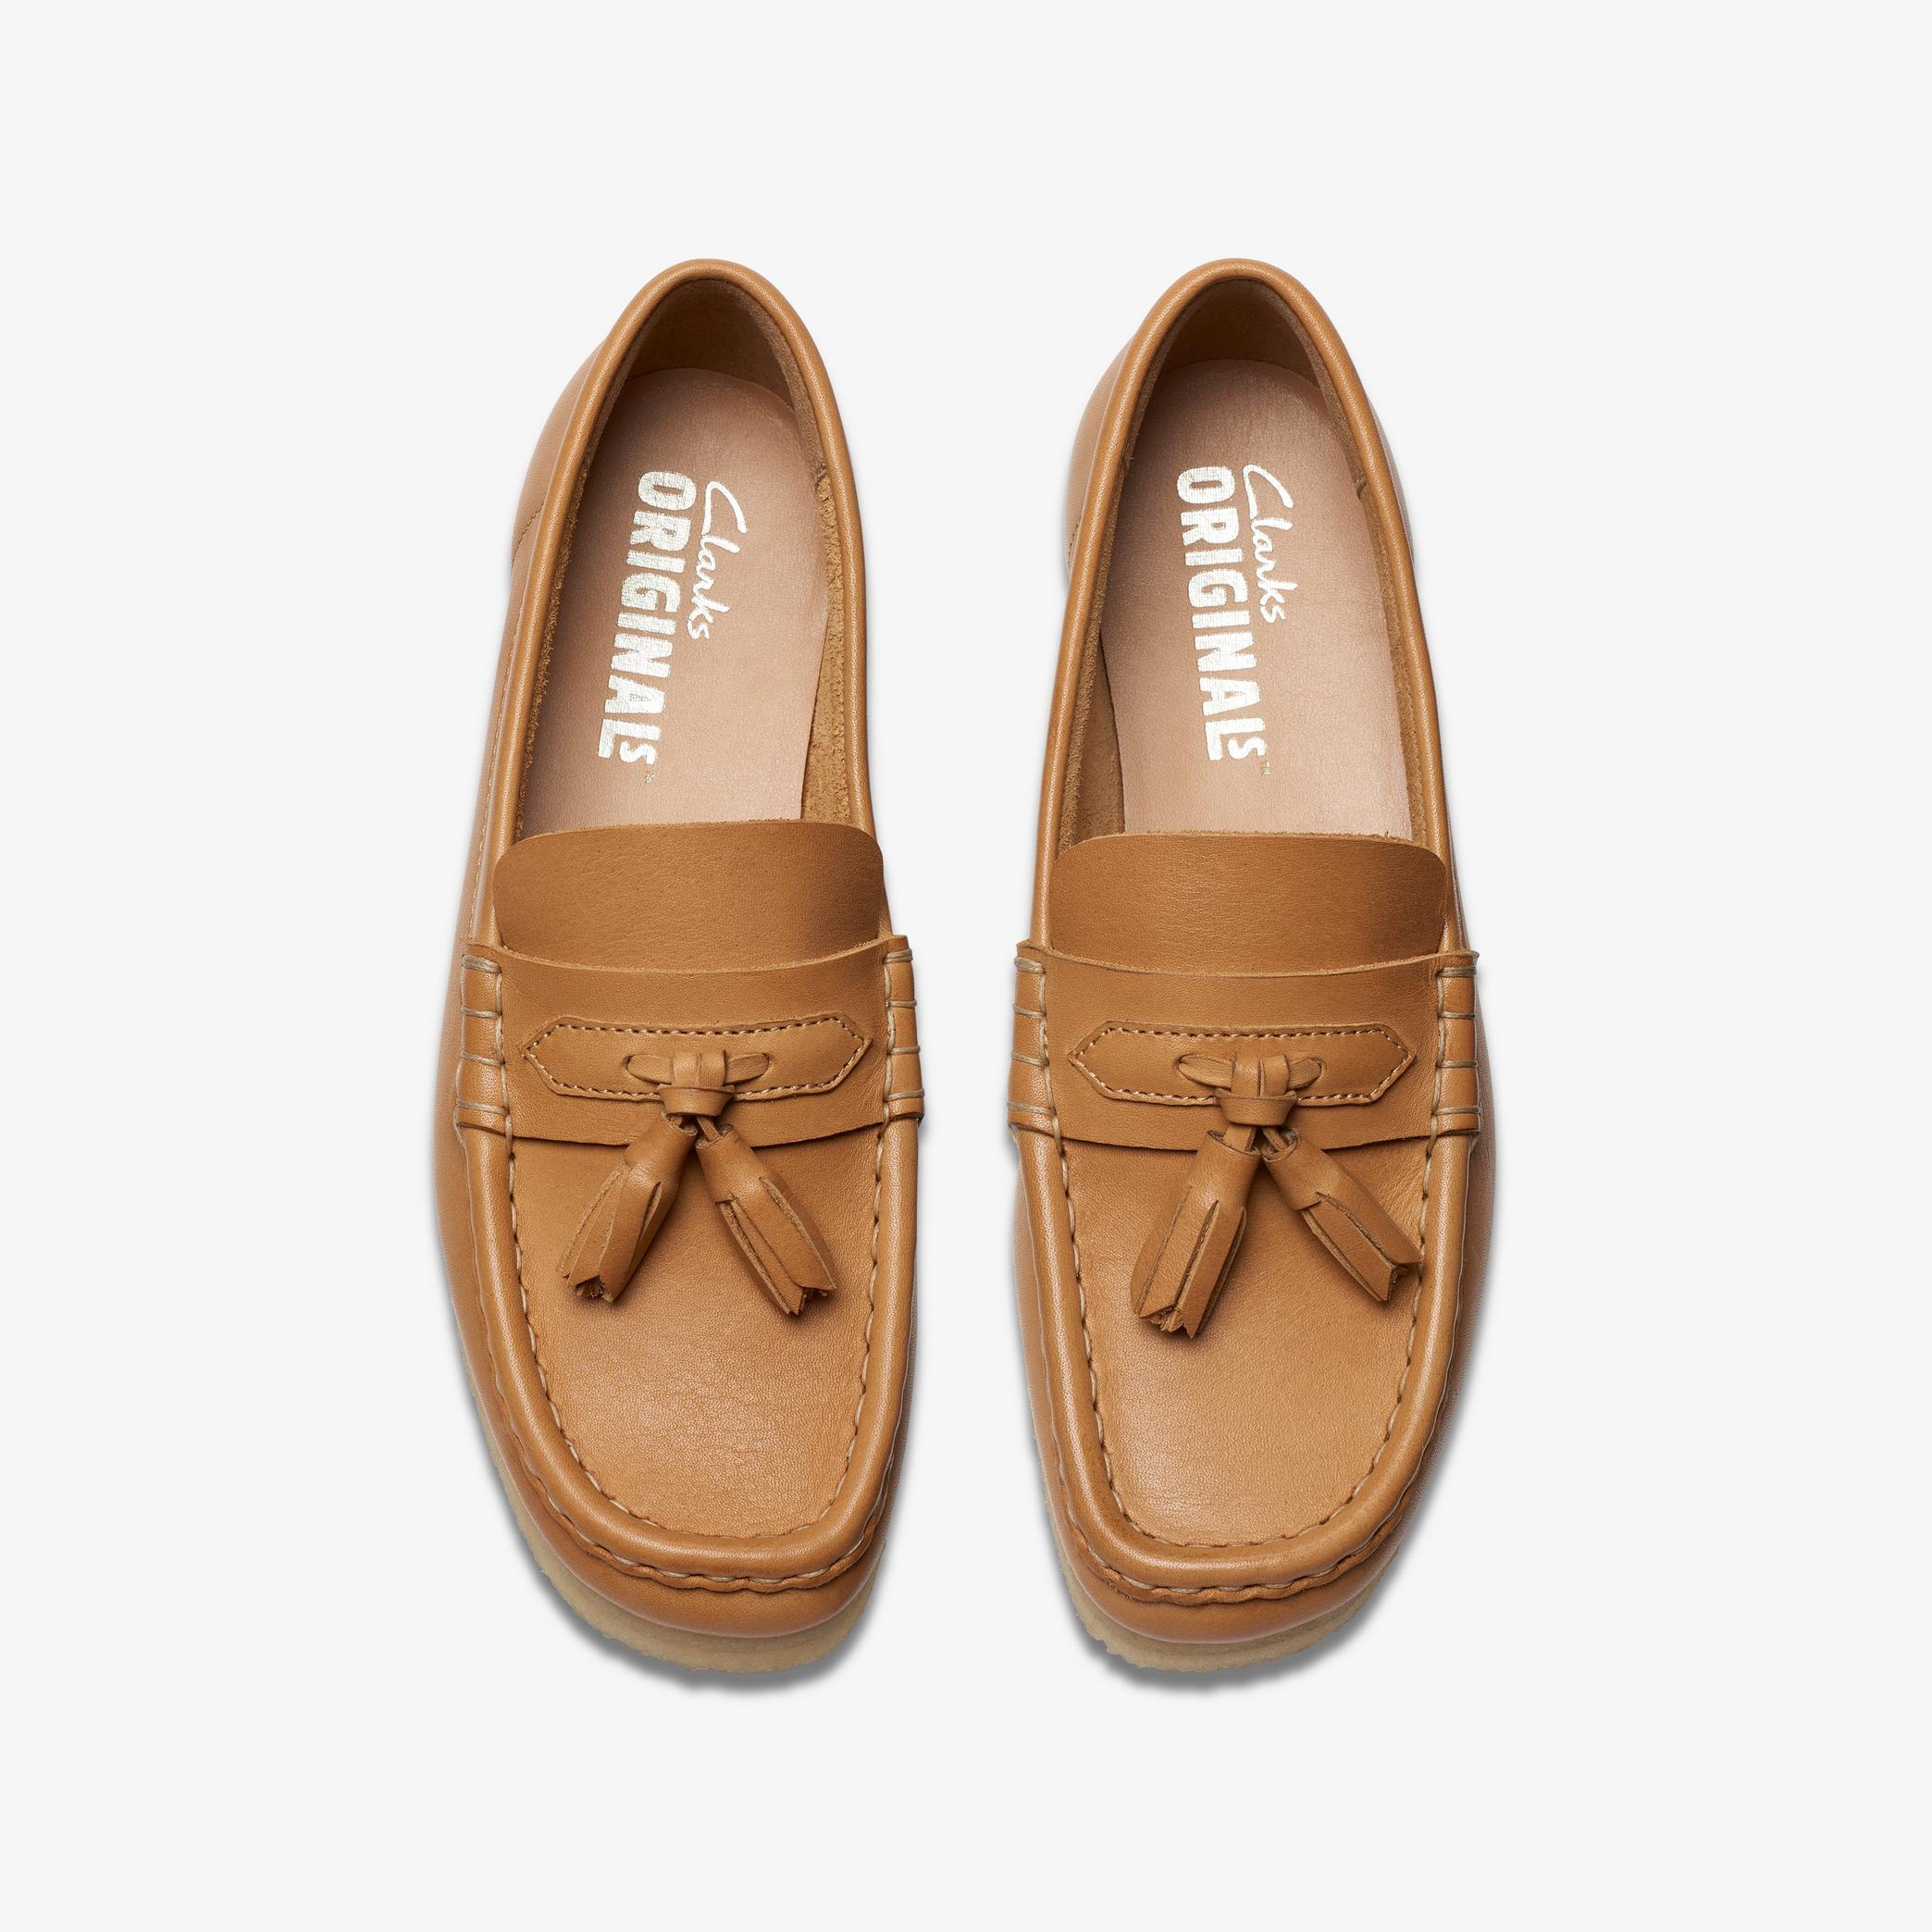 Wallabee Loafer Mid Tan Leather Loafers, view 6 of 7